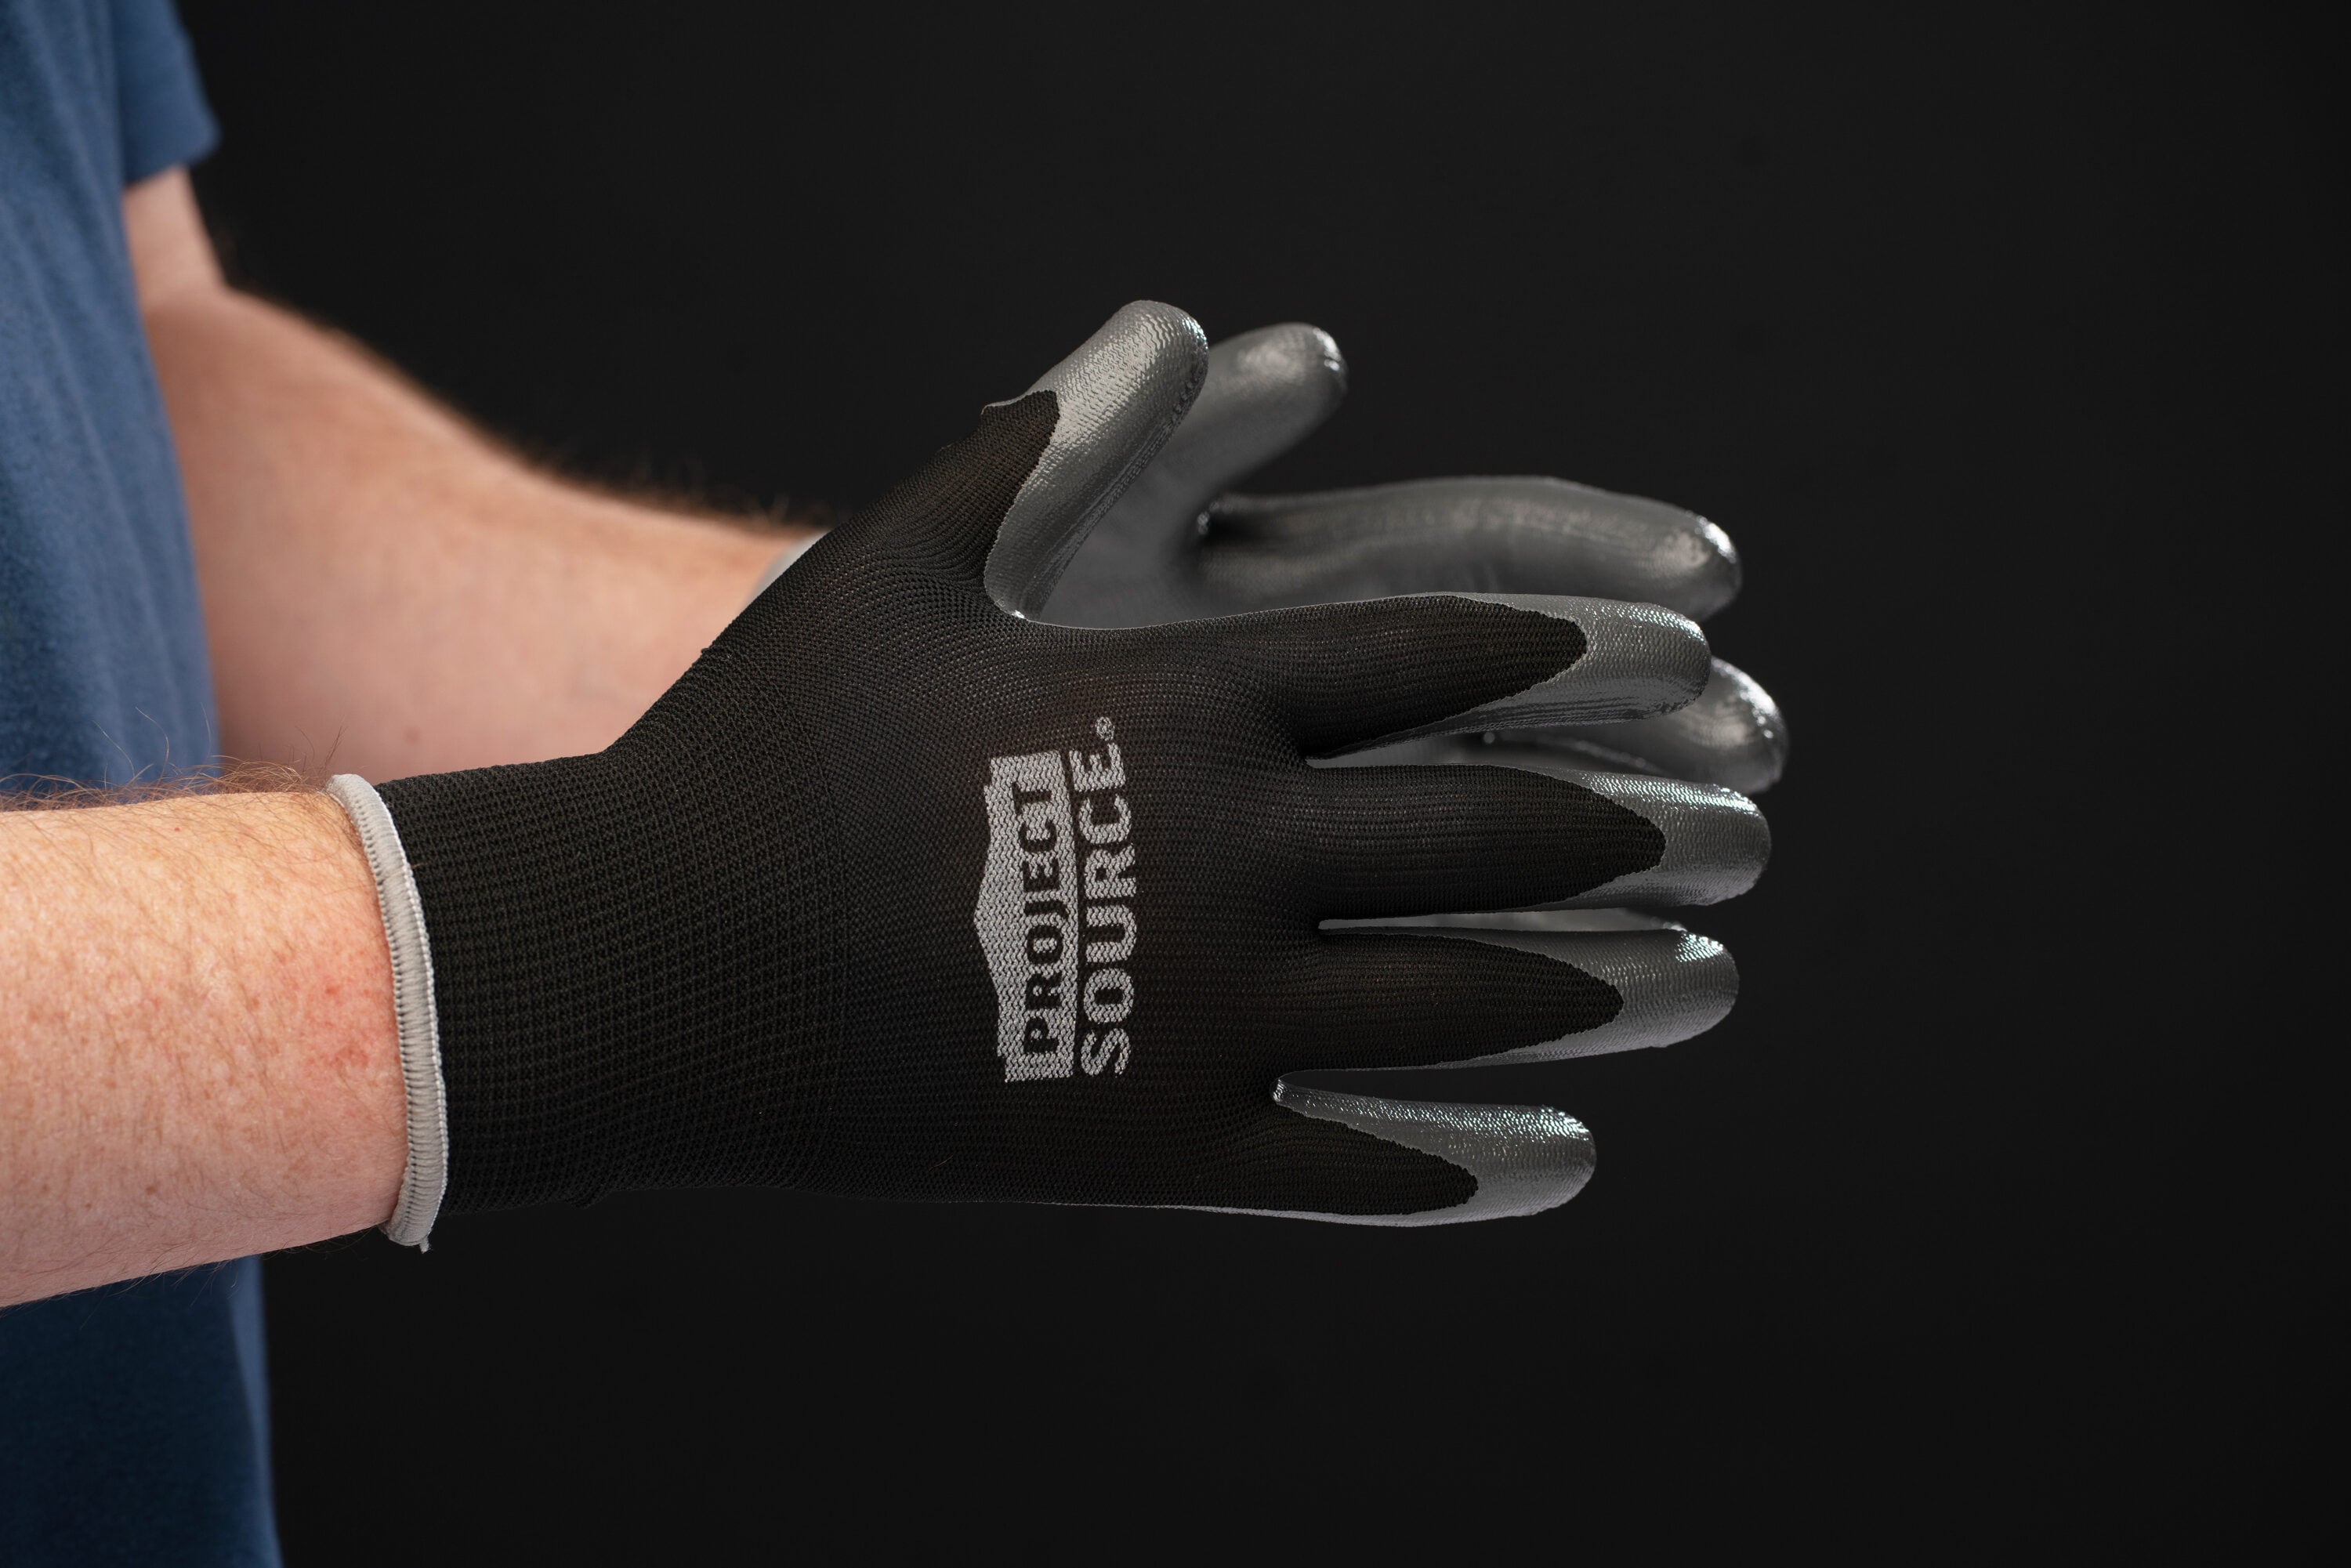 Project Source Large Black Polyurethane Dipped Polyester Gloves, (3-Pairs)  in the Work Gloves department at